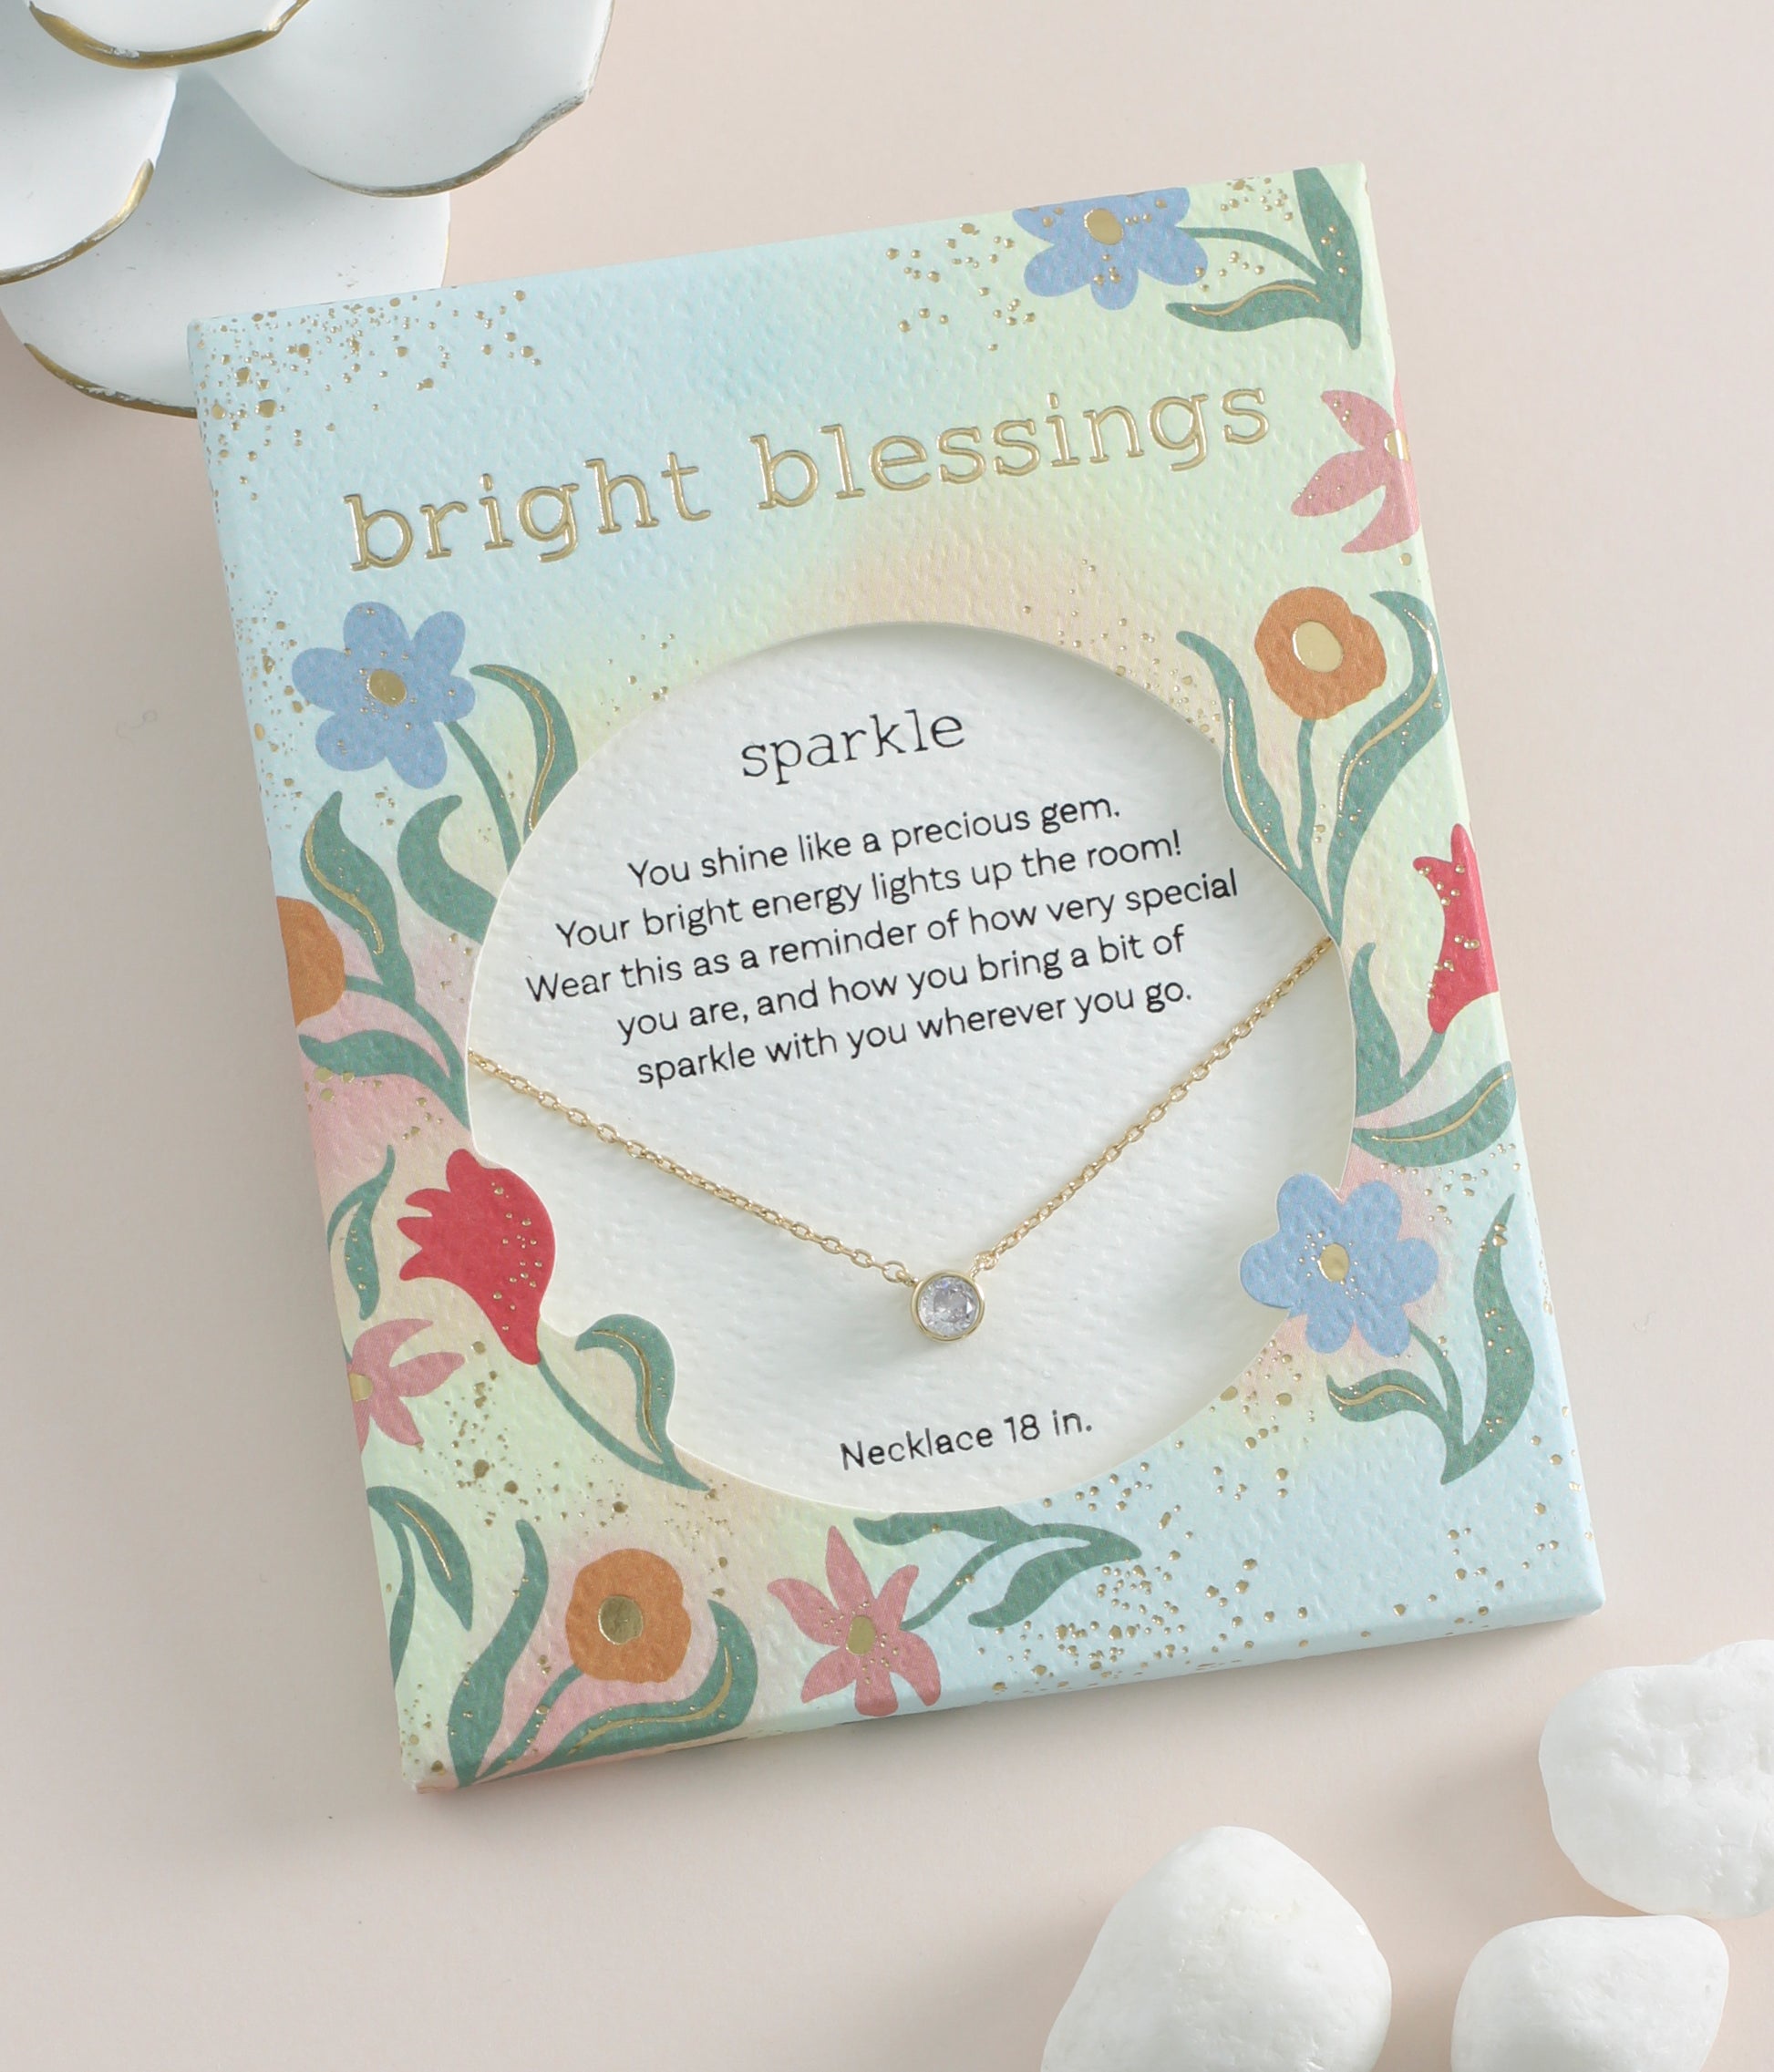 Bright Blessings Gold Sparkle Necklace Jewelry Periwinkle   